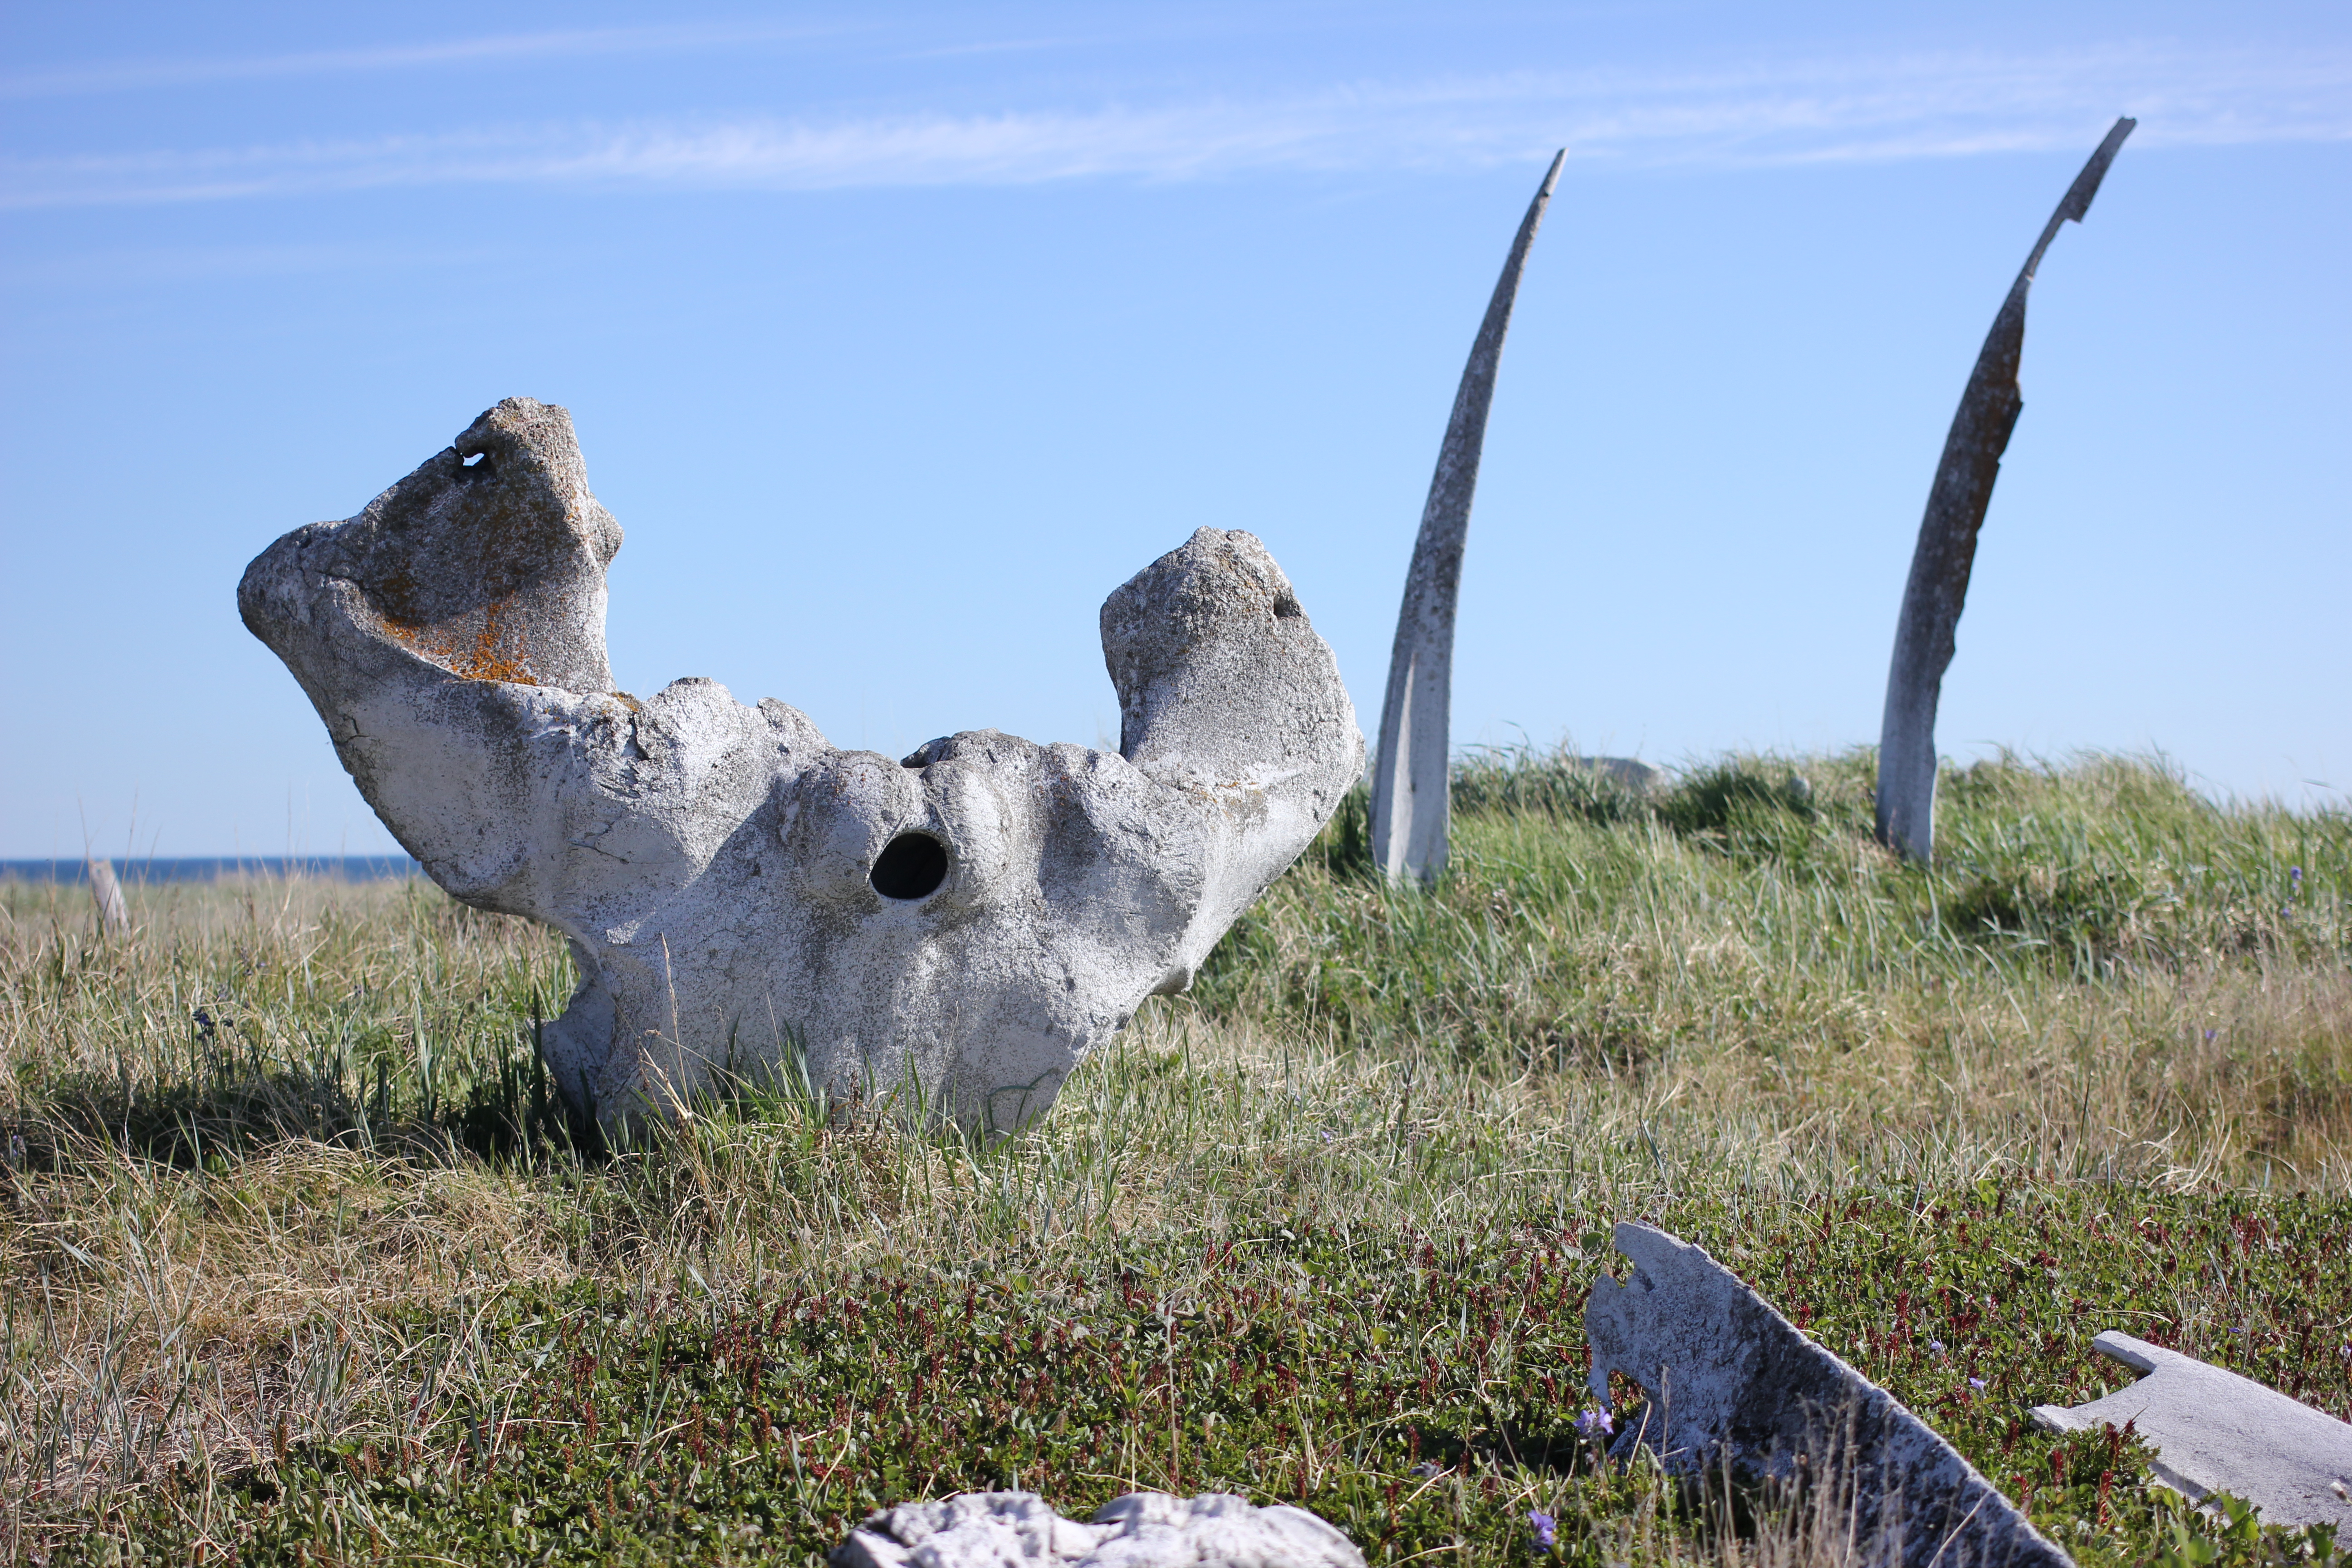 Whale bones at Mechigmen, Chukotka, an ancient settlement filled with evidence of the region’s strong subsistence culture. Bones accumulated here for years, creating rolling hills on the otherwise flat spit. (Kirsten Swann / Alaska Dispatch News)